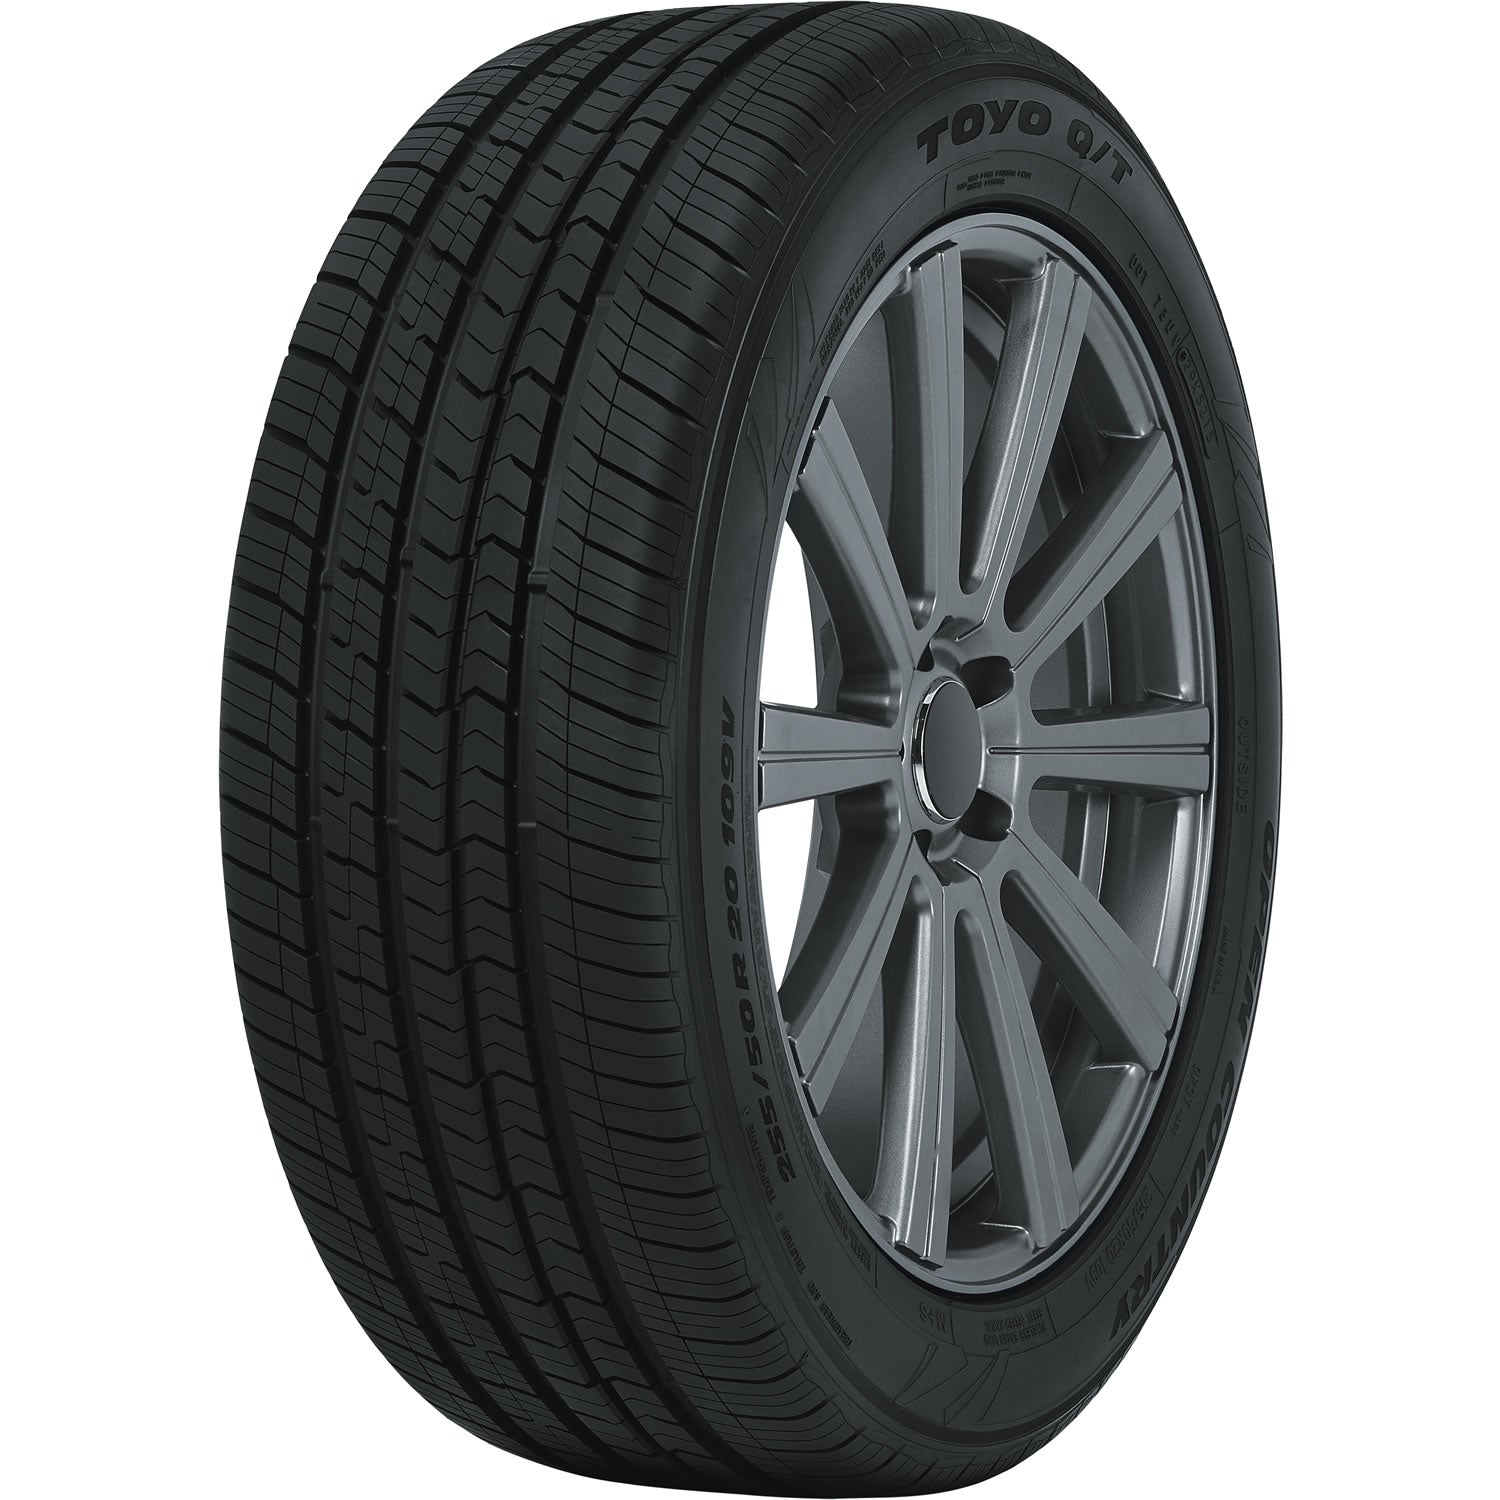 TOYO TIRES OPEN COUNTRY Q/T P235/70R16 (29X9.4R 16) Tires